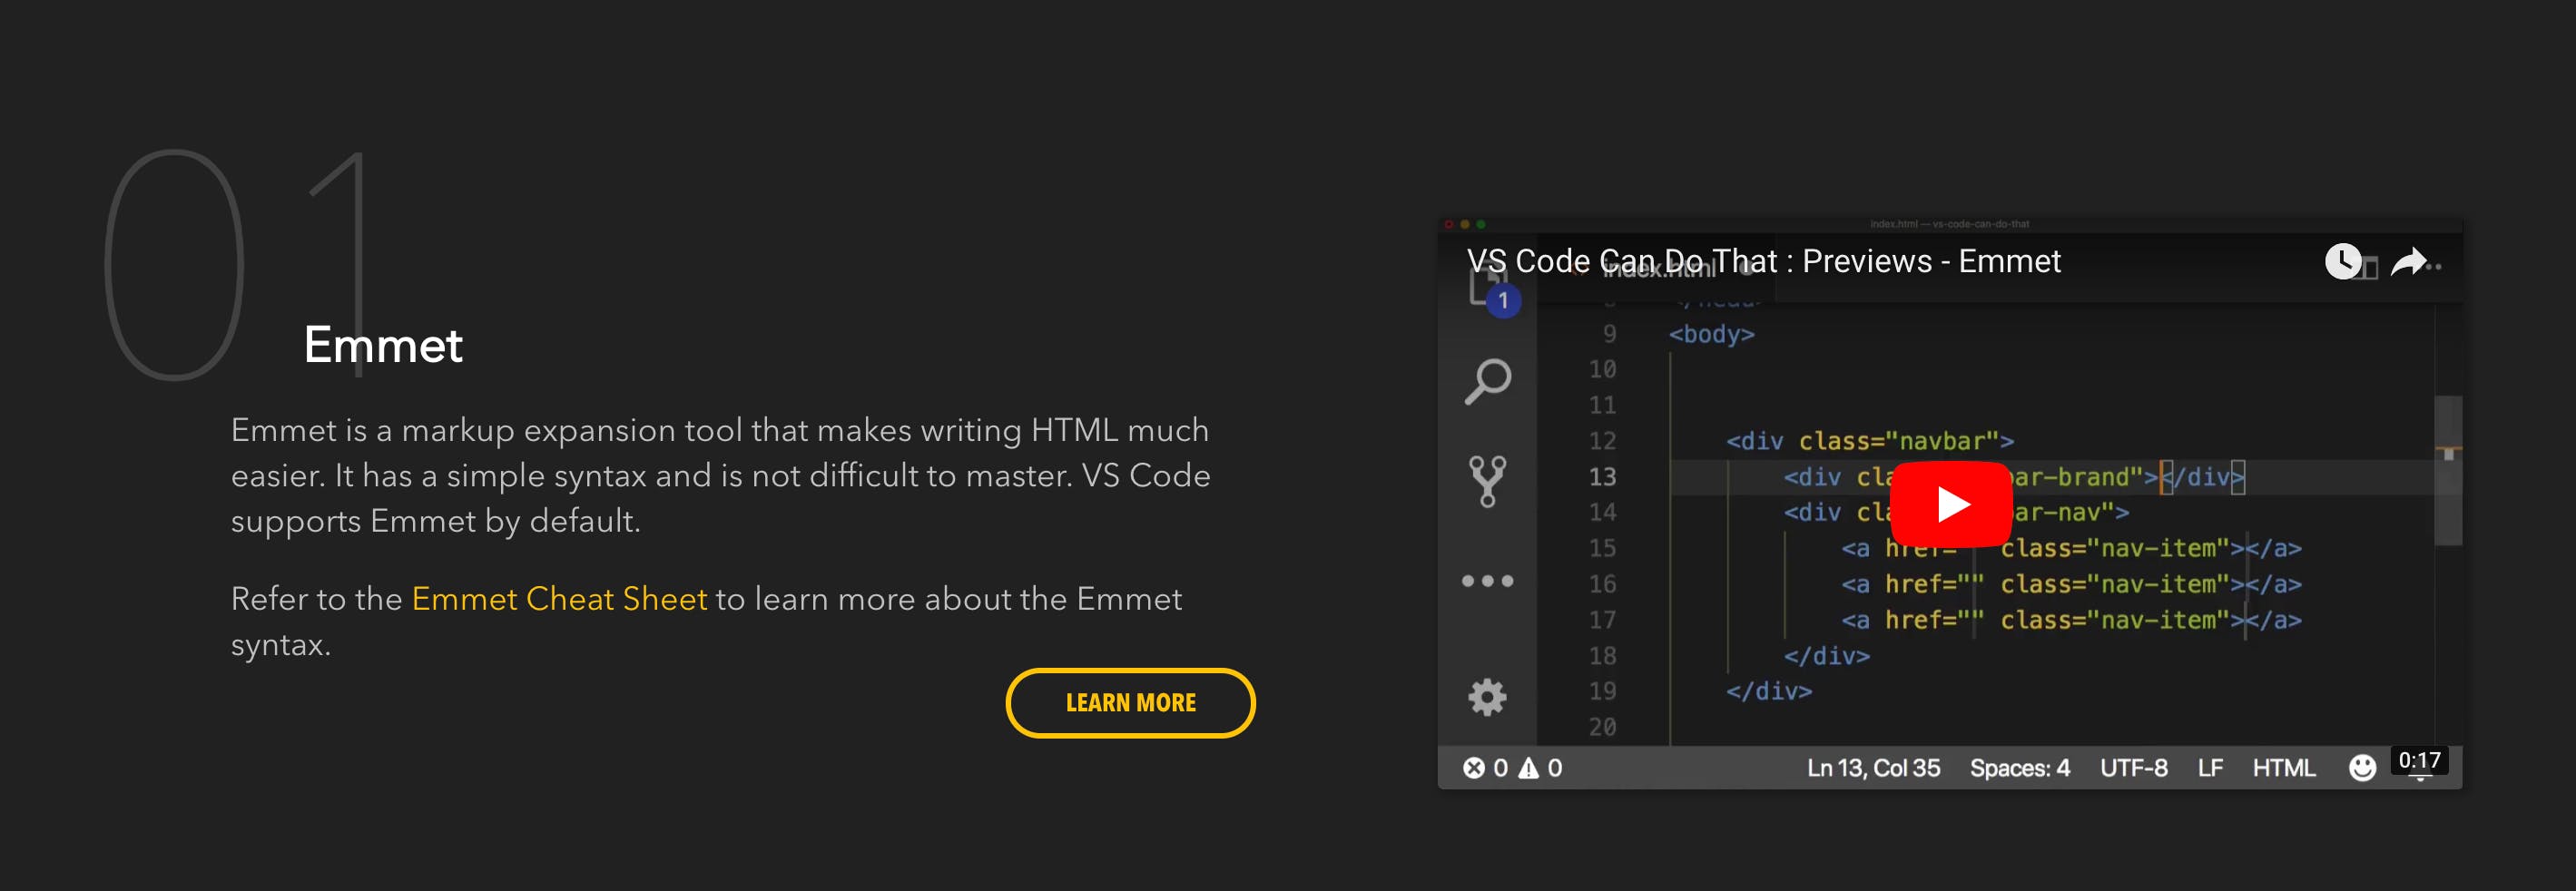 VS Code can do that?! media 3